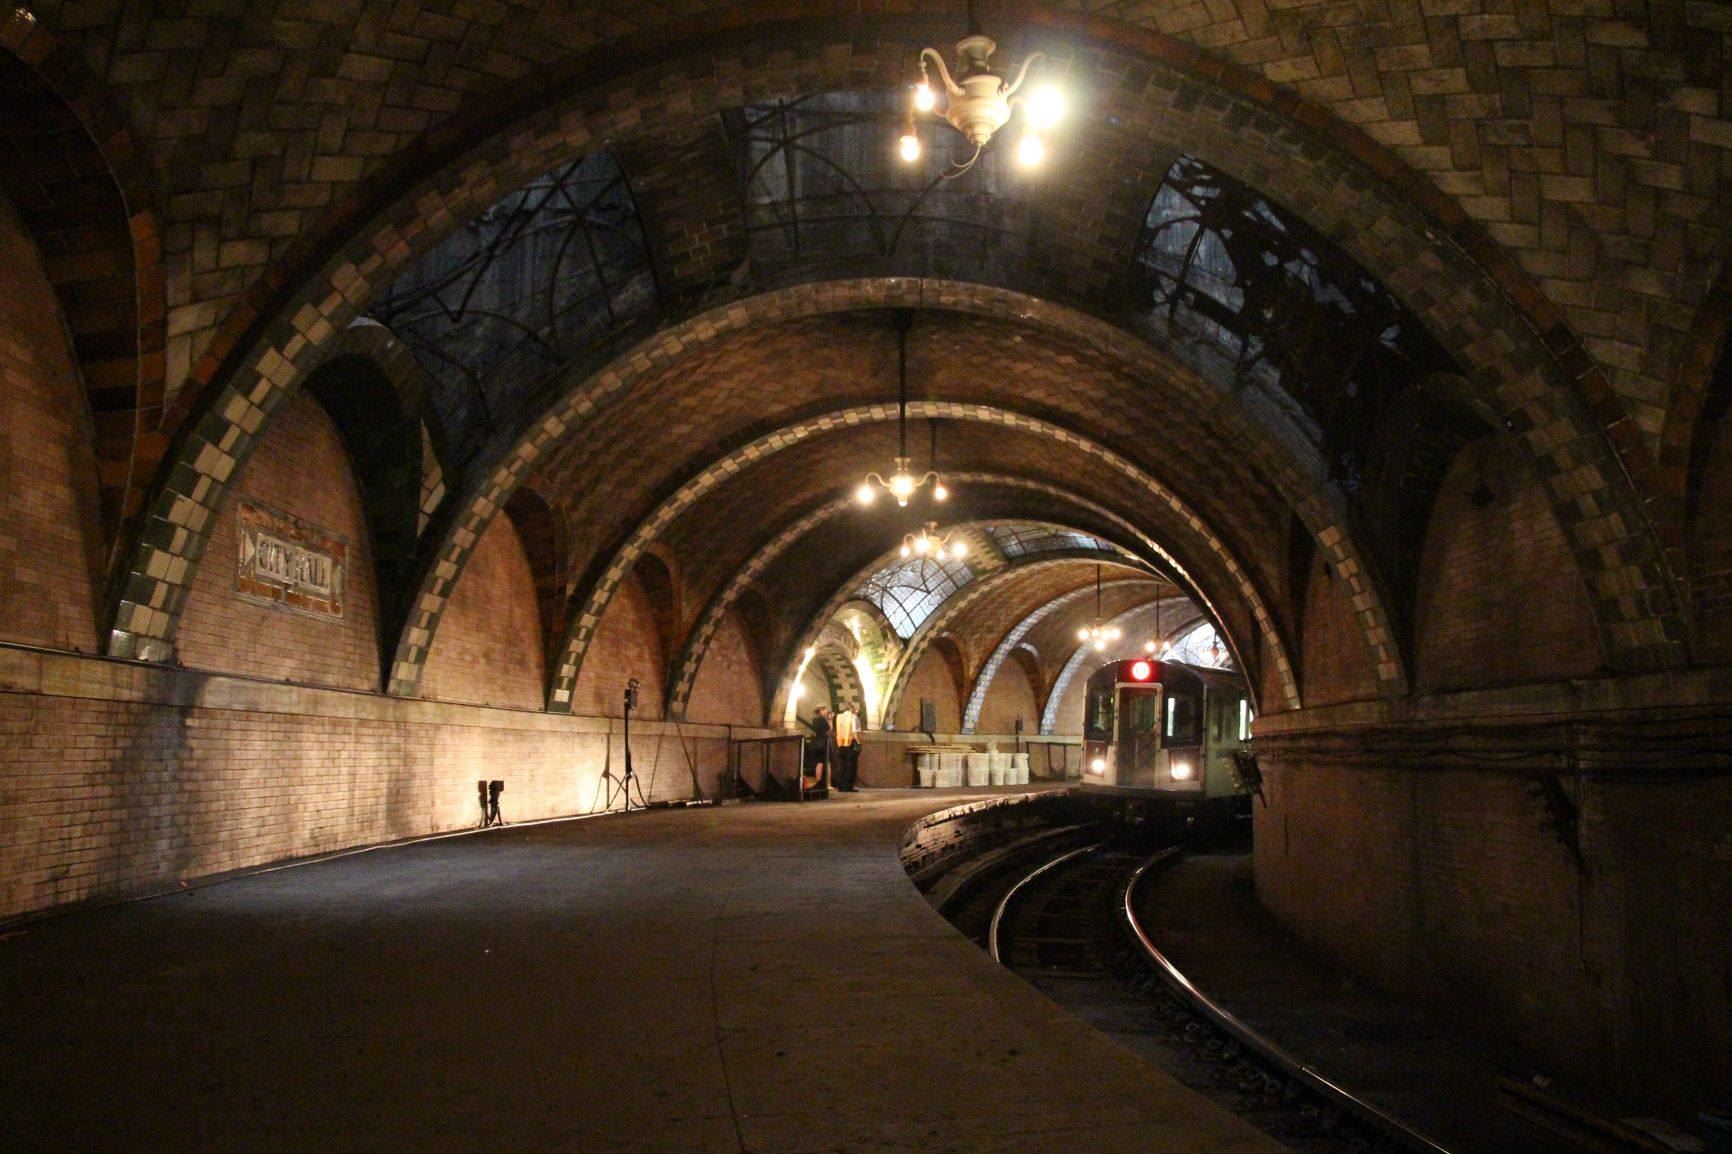 Inside what looks as an old subway stop with large archways and classic subway tile. A subway train car can be seen in the distance. 